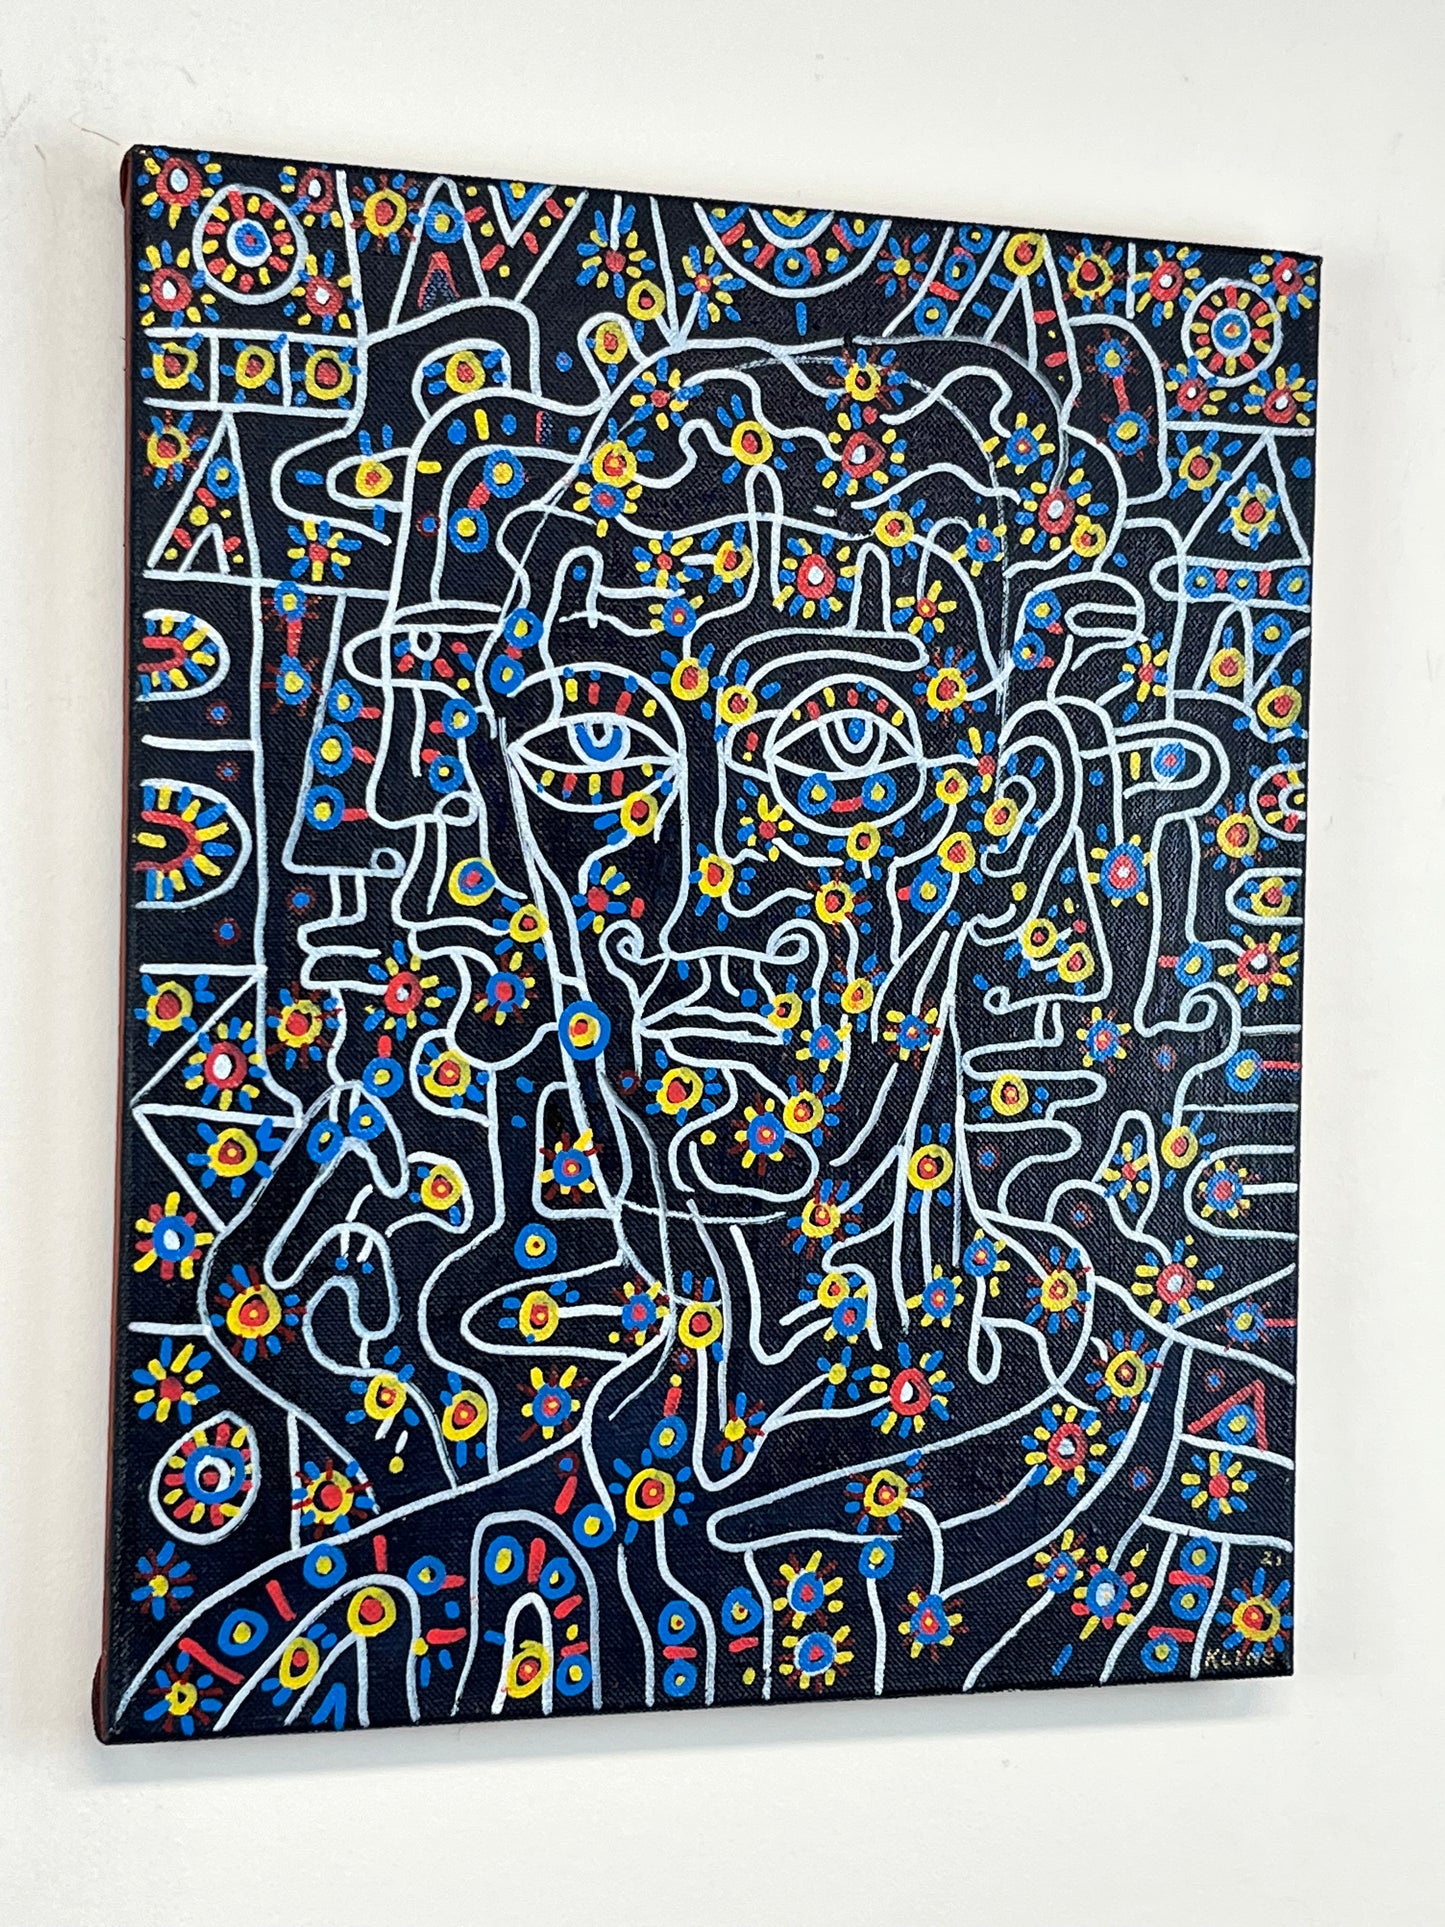 Self-Portrait. Oil and Oil Markers on Linen. 15" x 18". John Kline Artwork. Blue Yellow Red Painting